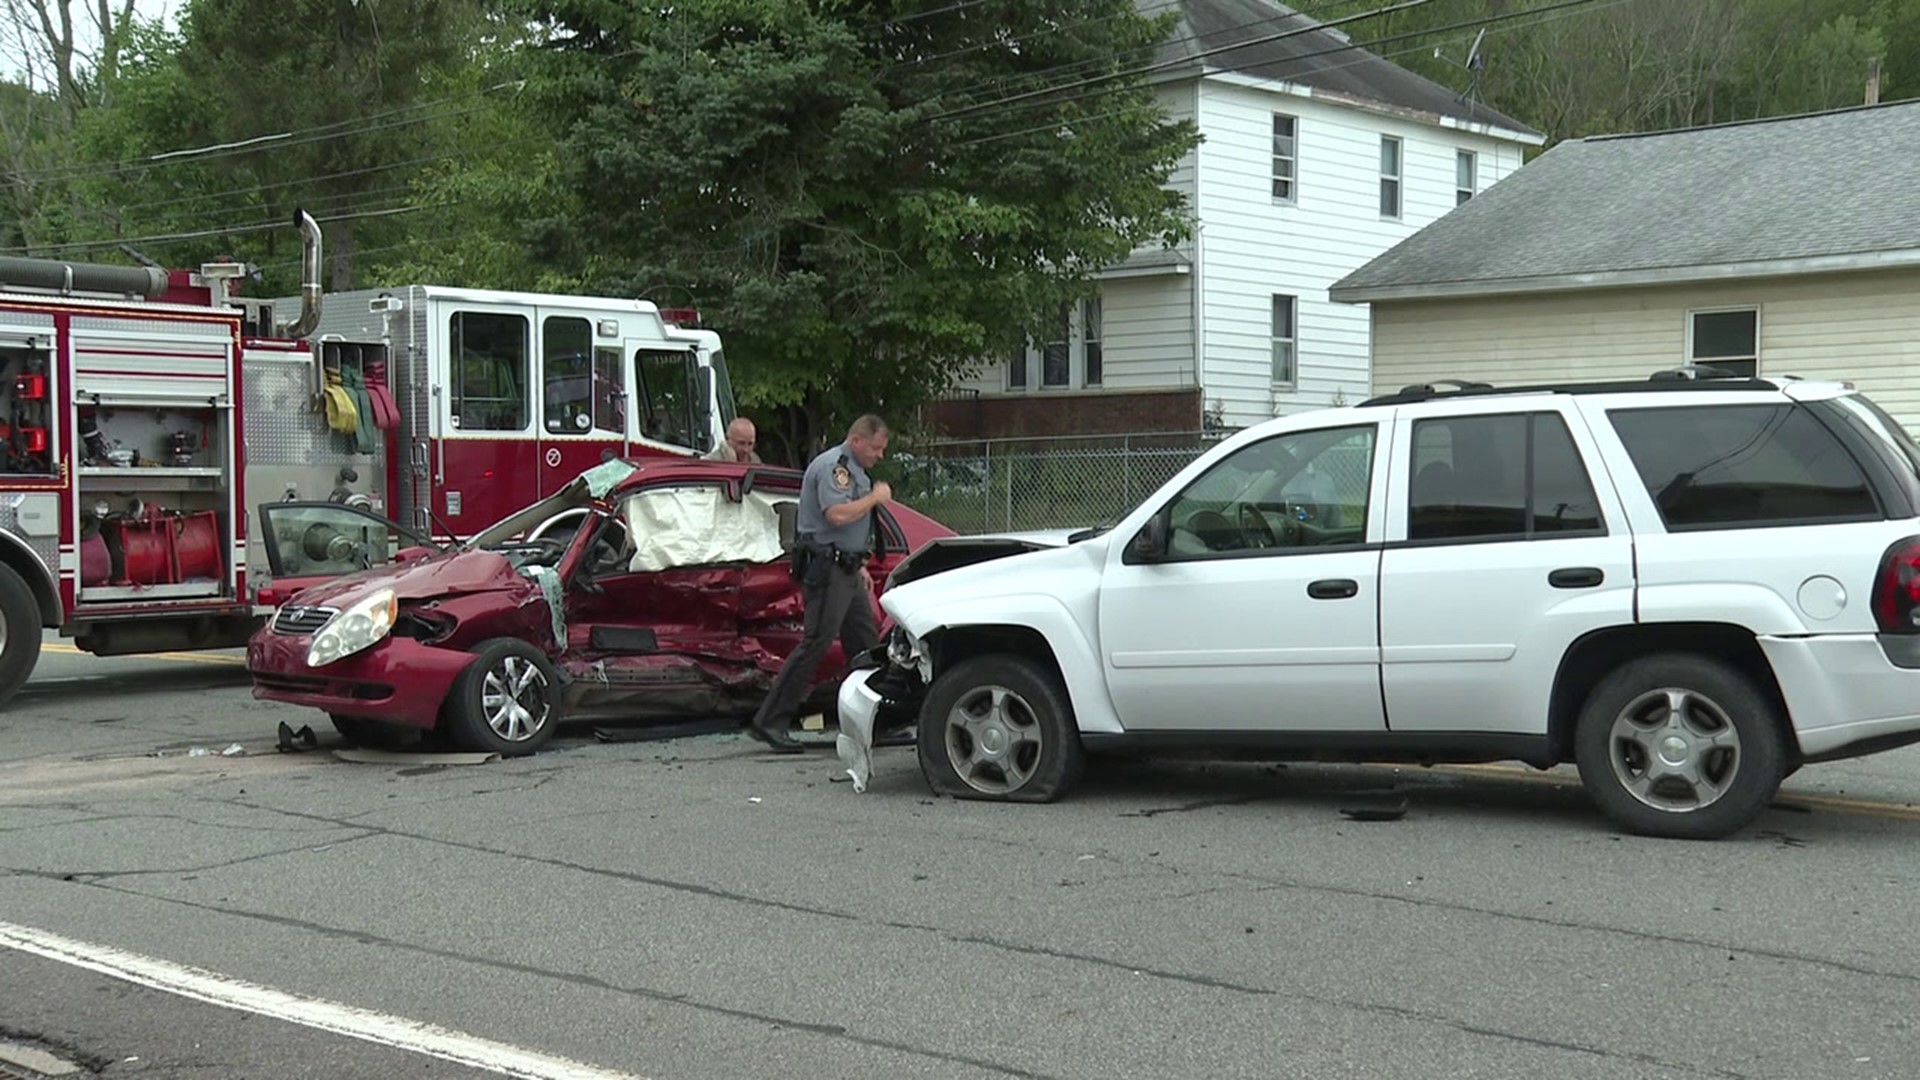 The crash happened just before 5 p.m. Tuesday night along Main Street in Carbondale Township.